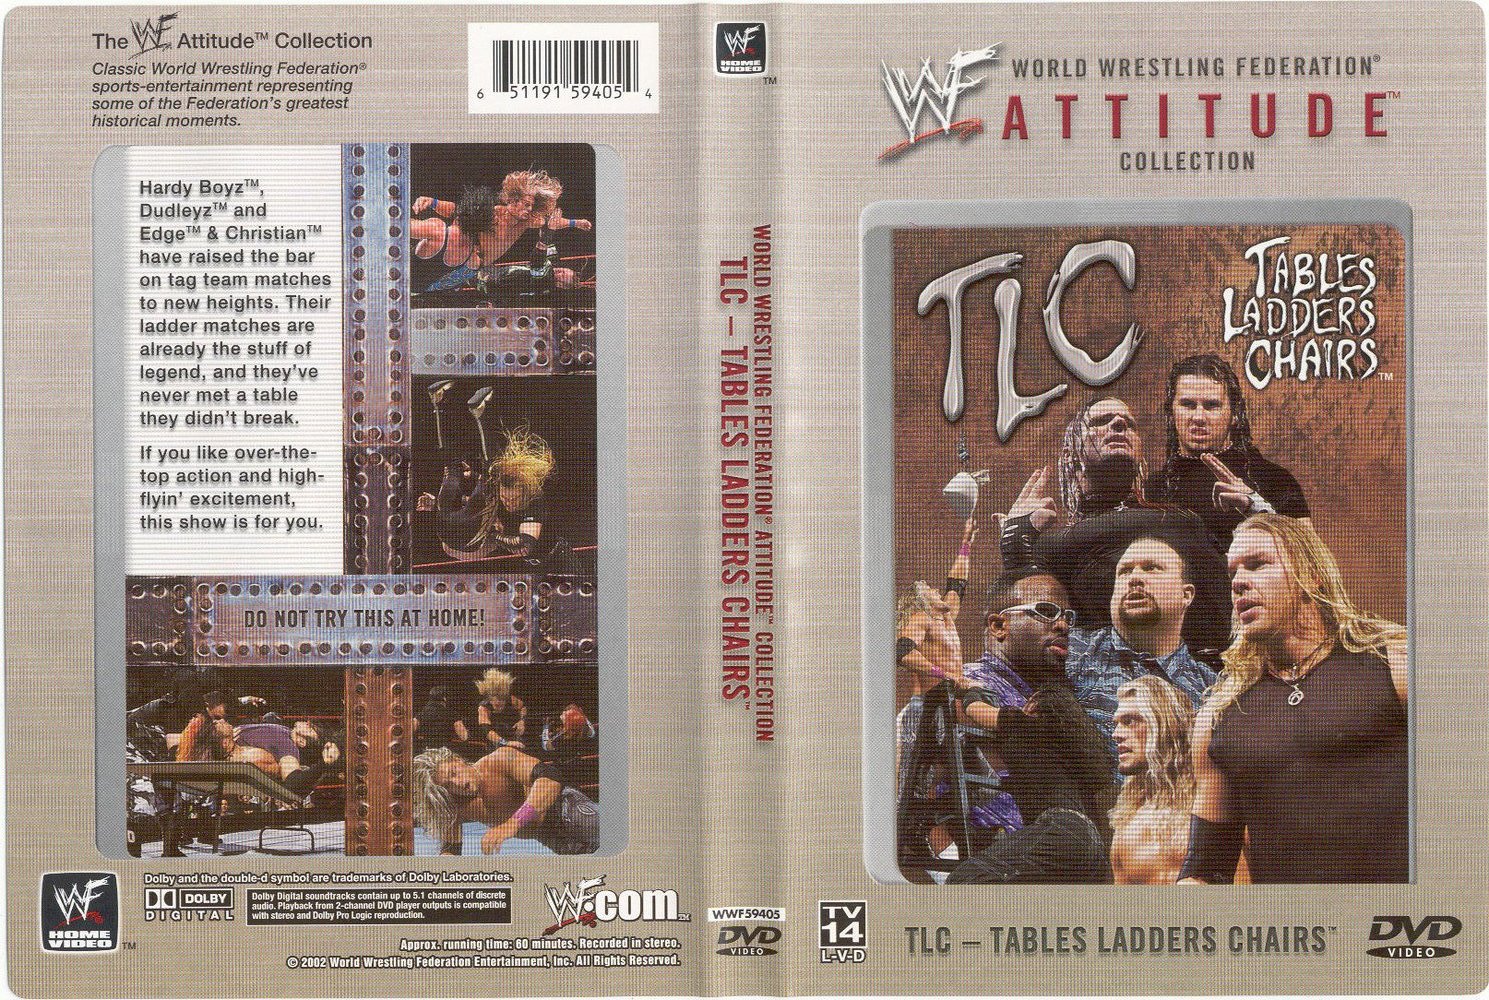 Jaquette DVD WWE Tables Ladders Chairs